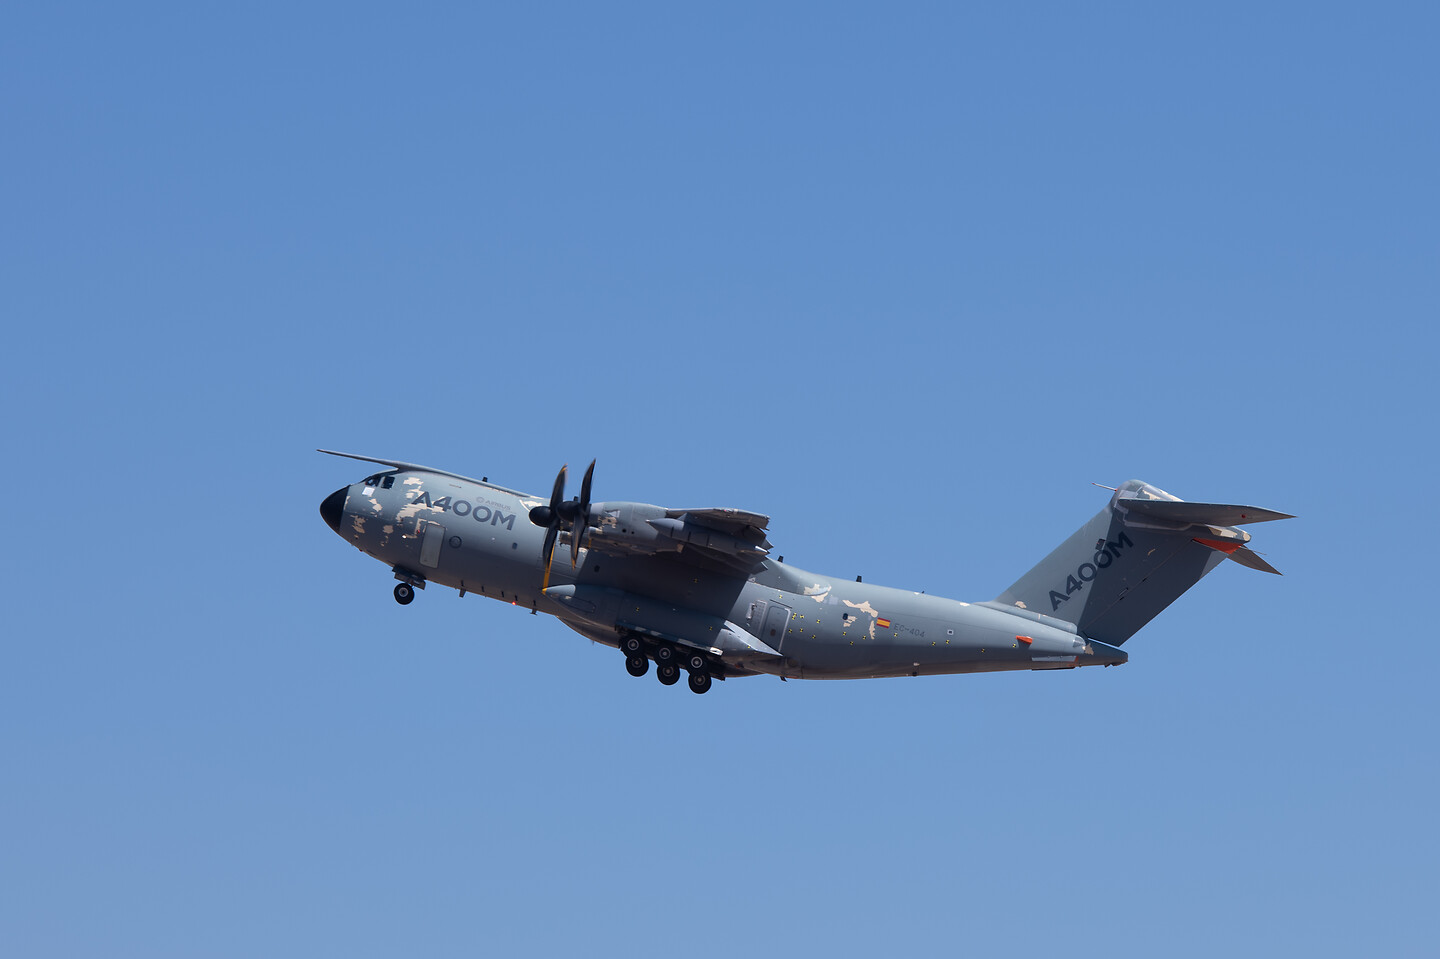 A400M Atlas military transport aircraft. Photo: Airbus